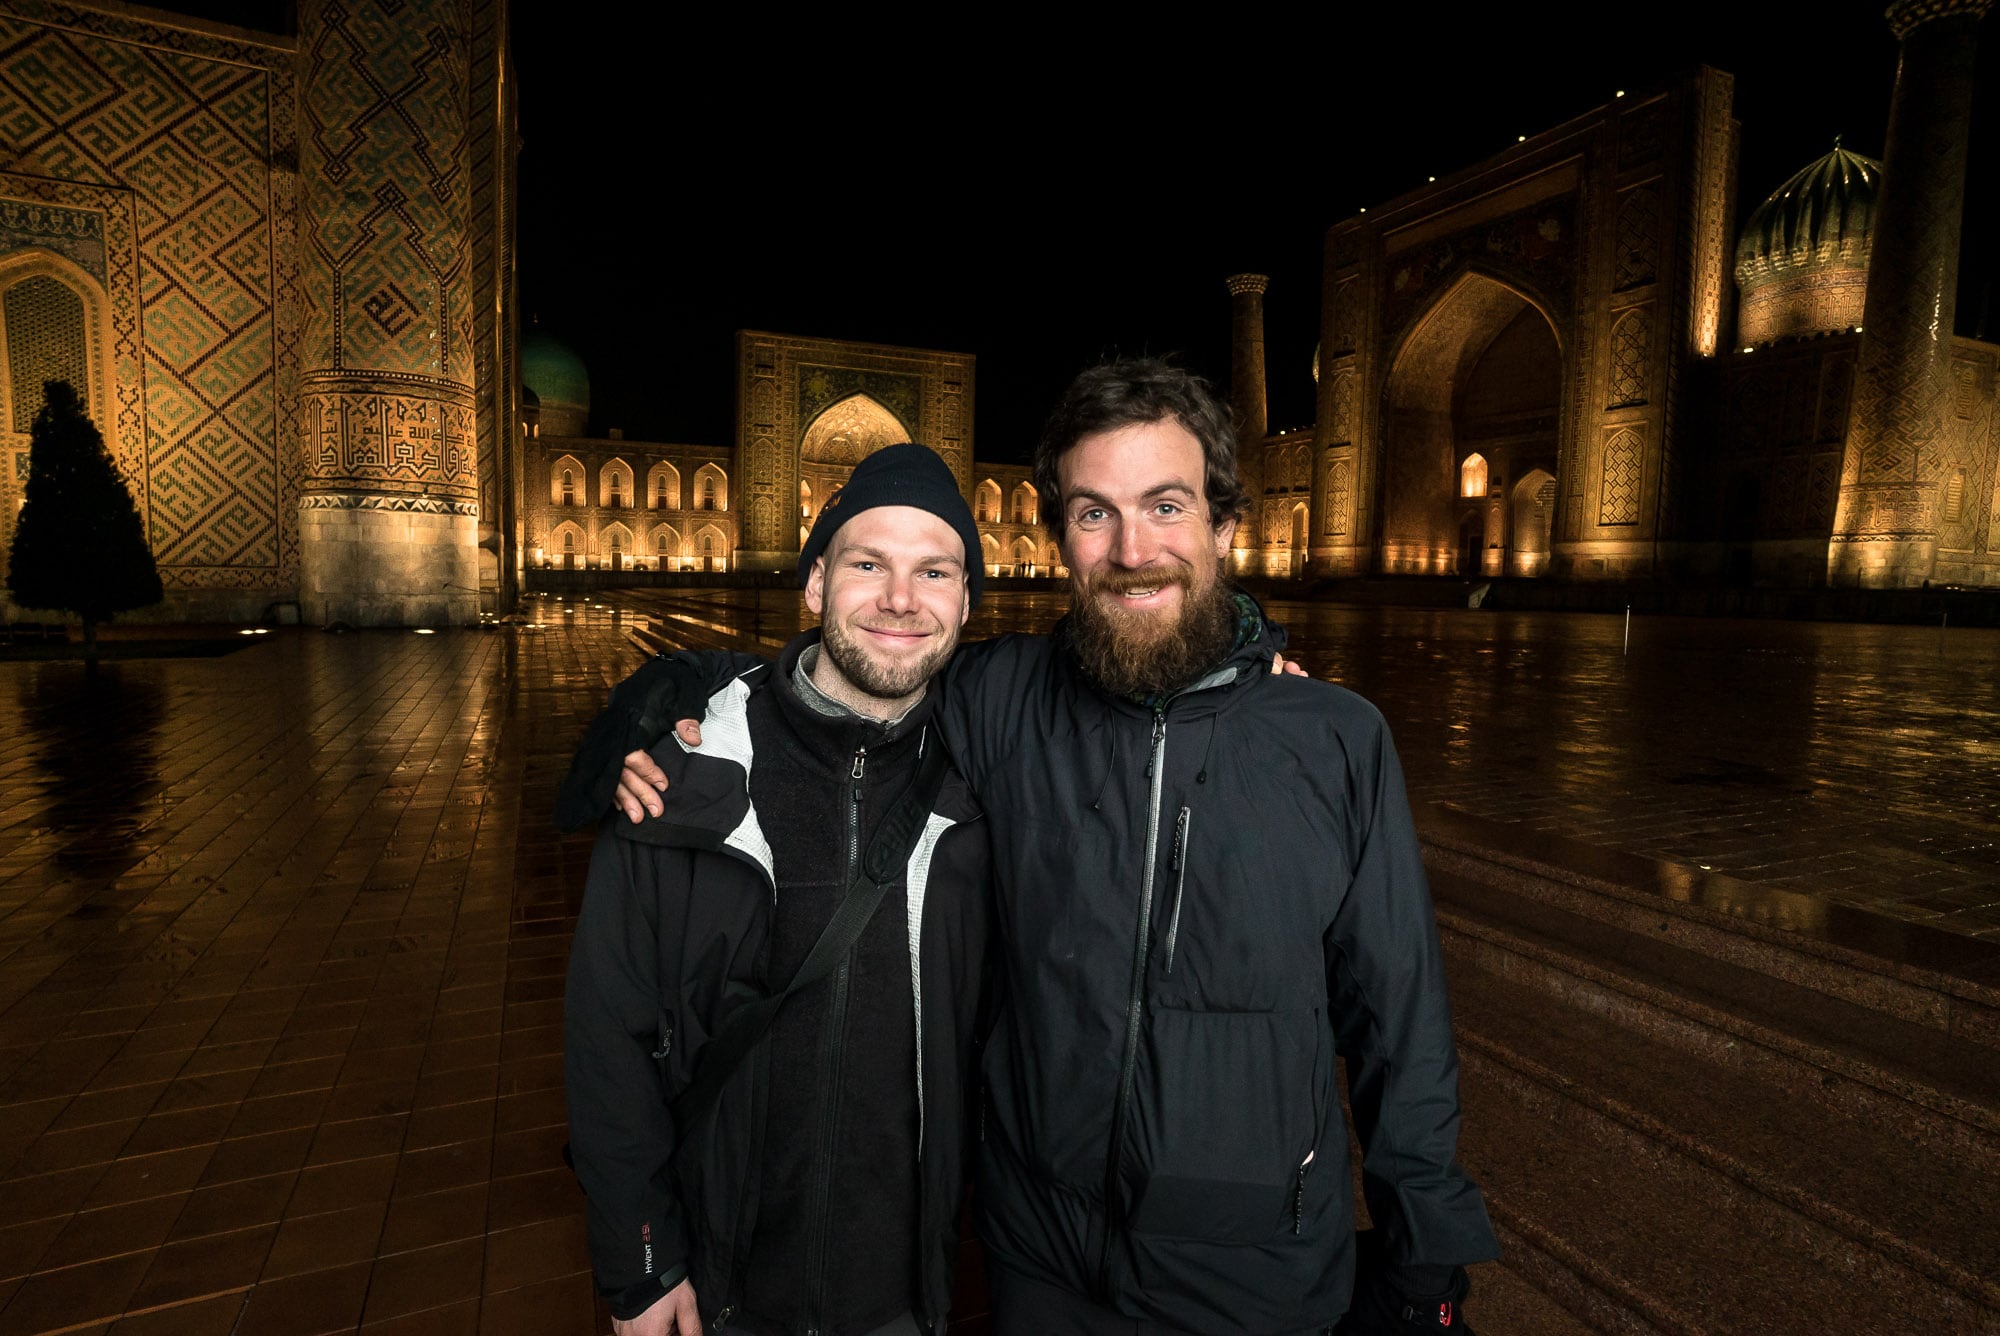 Ruben and Chris at the Registan